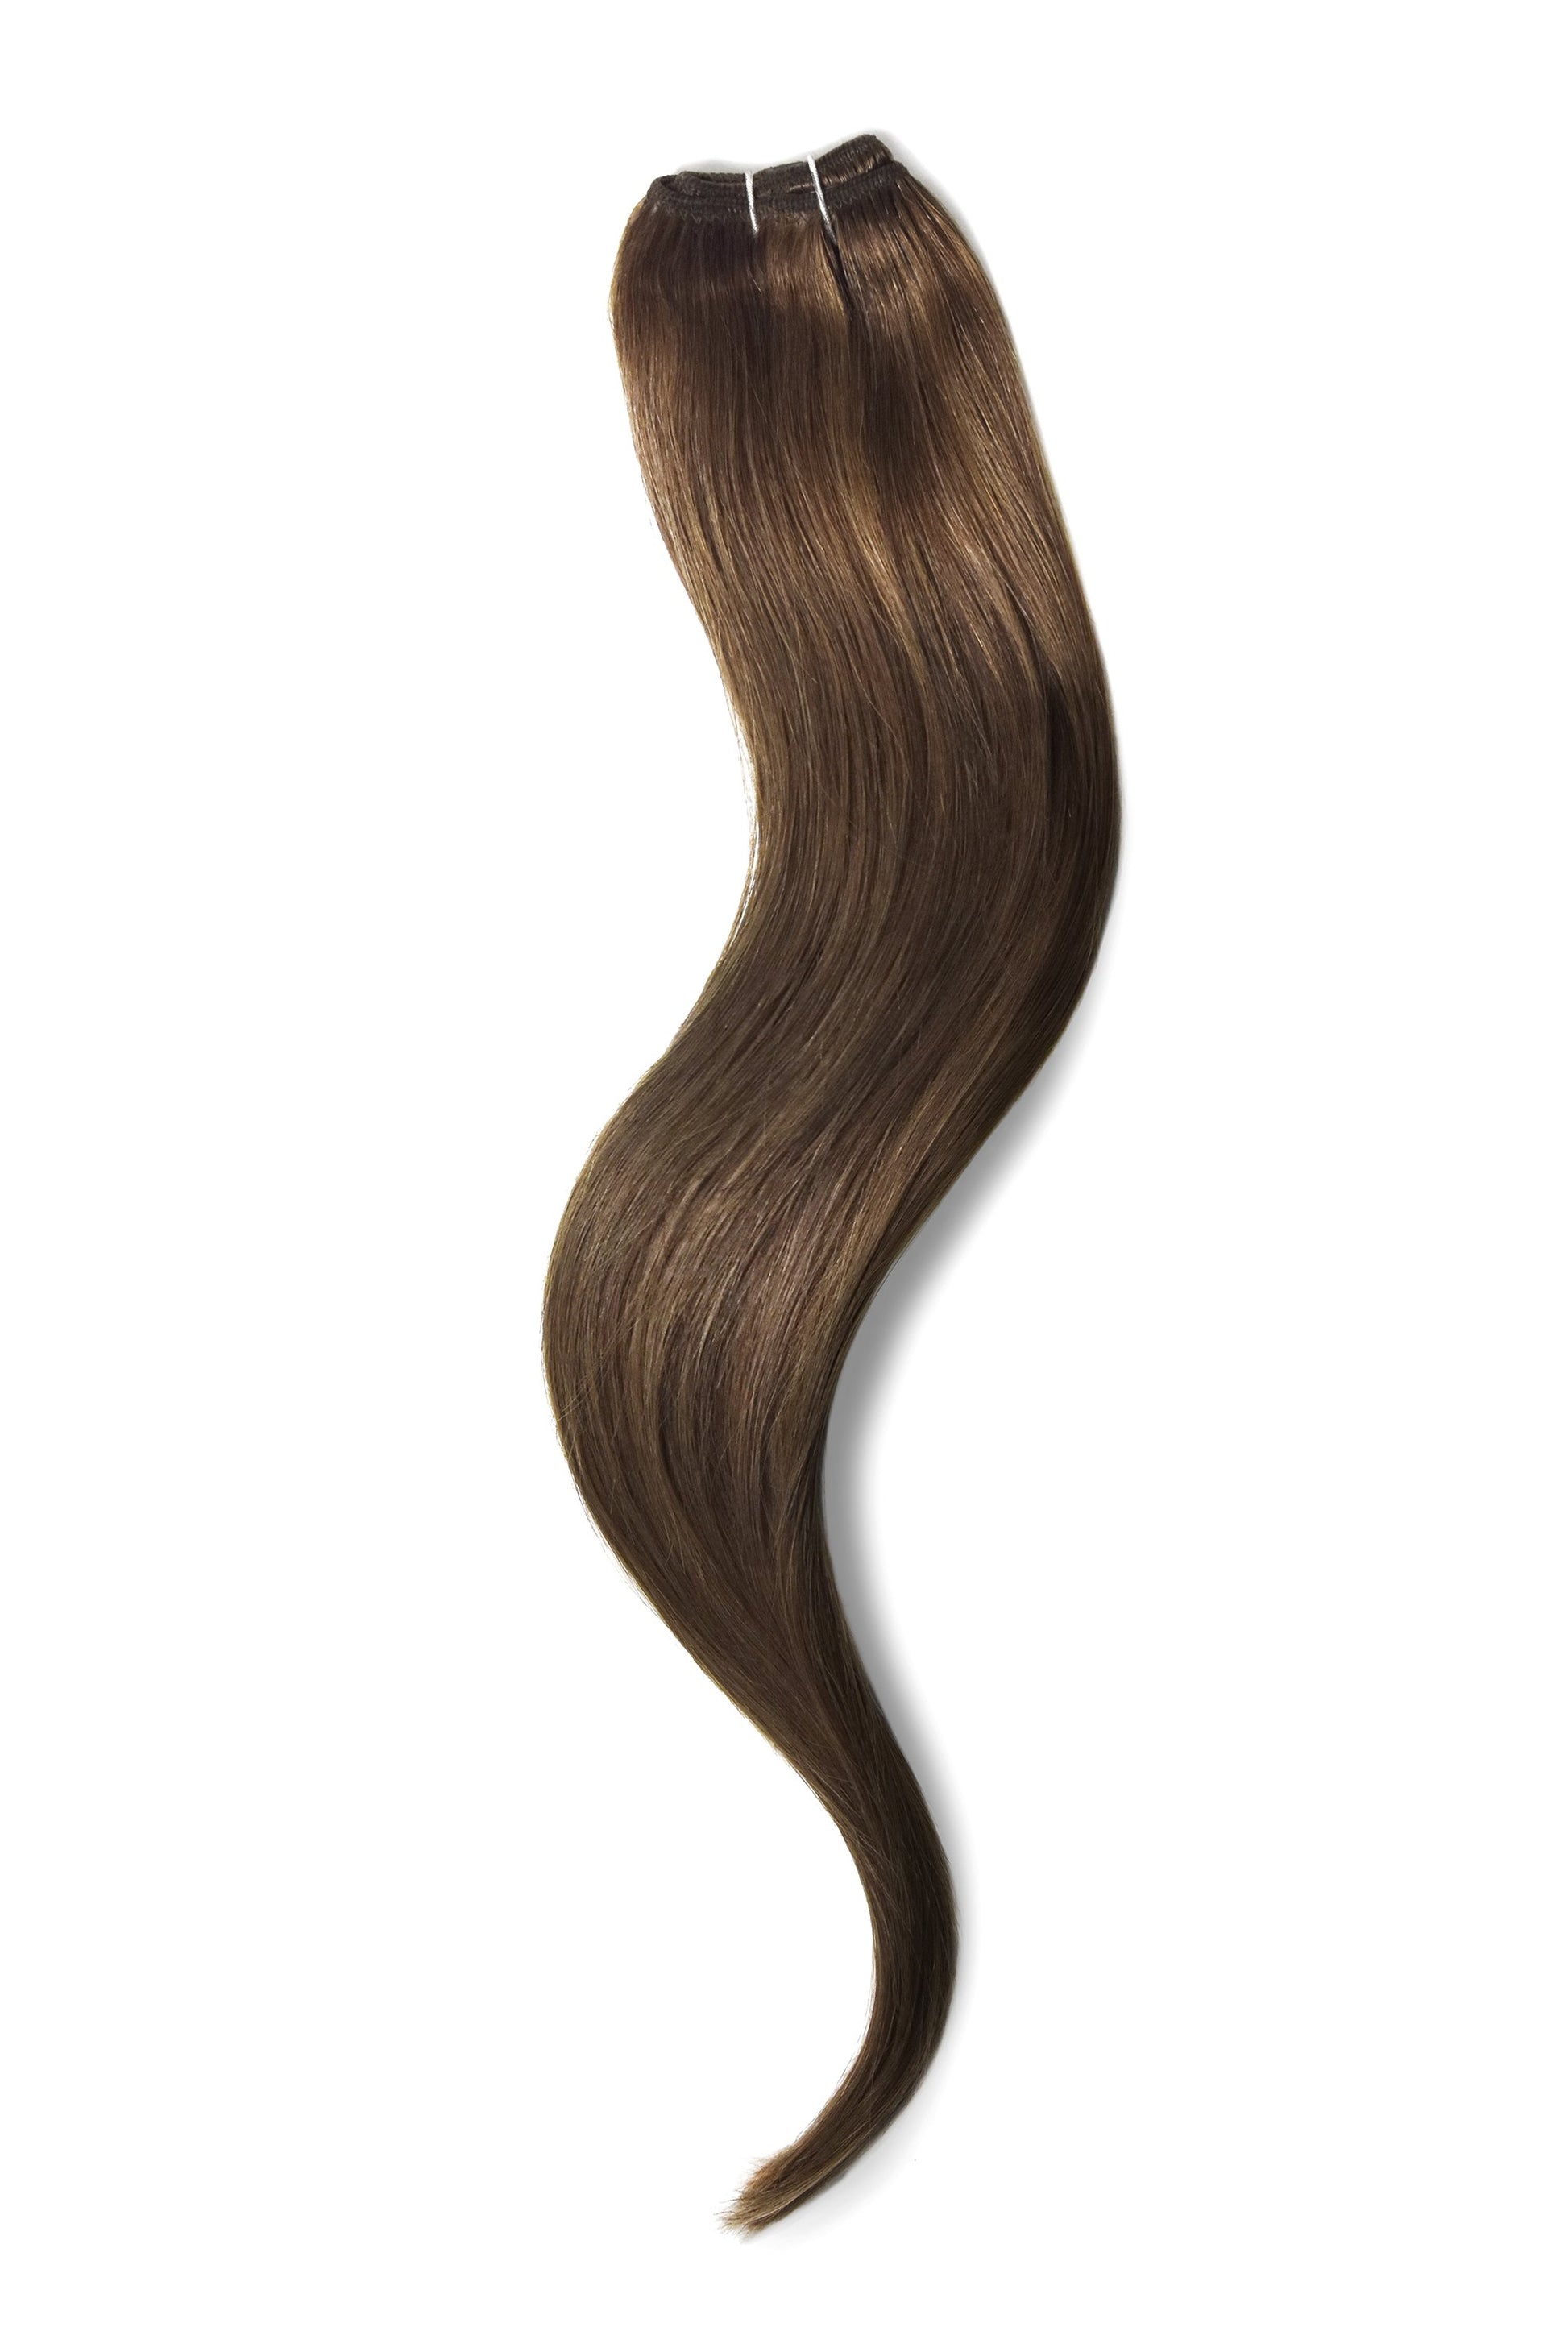 One Piece Top-up Remy Clip in Human Hair Extensions - Light/Chestnut Brown (#6)